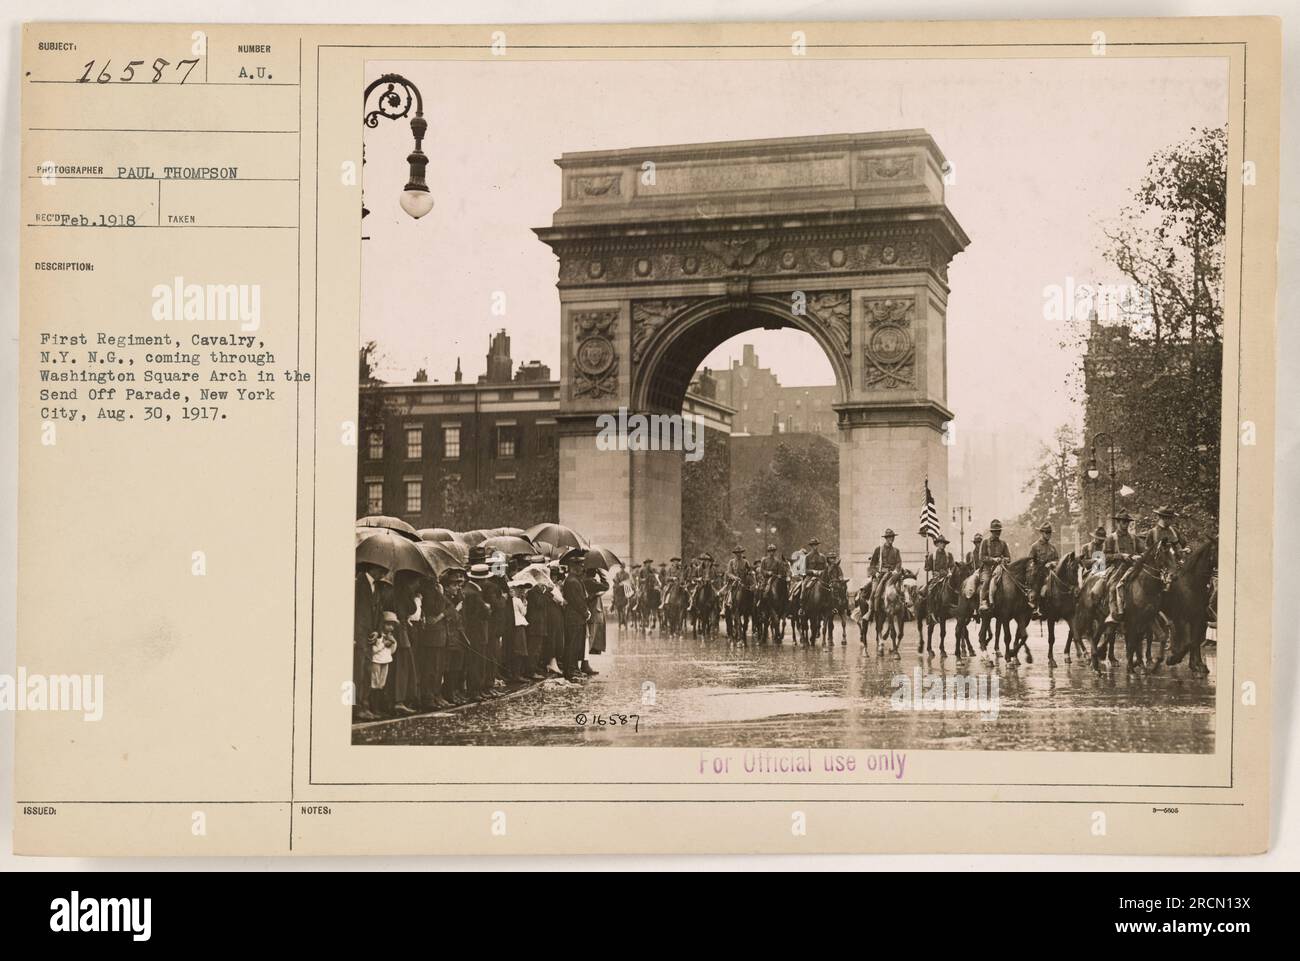 First Regiment, Cavalry, N.Y. National Guard, passing through Washington Square Arch during the Send Off Parade in New York City on August 30, 1917. Stock Photo